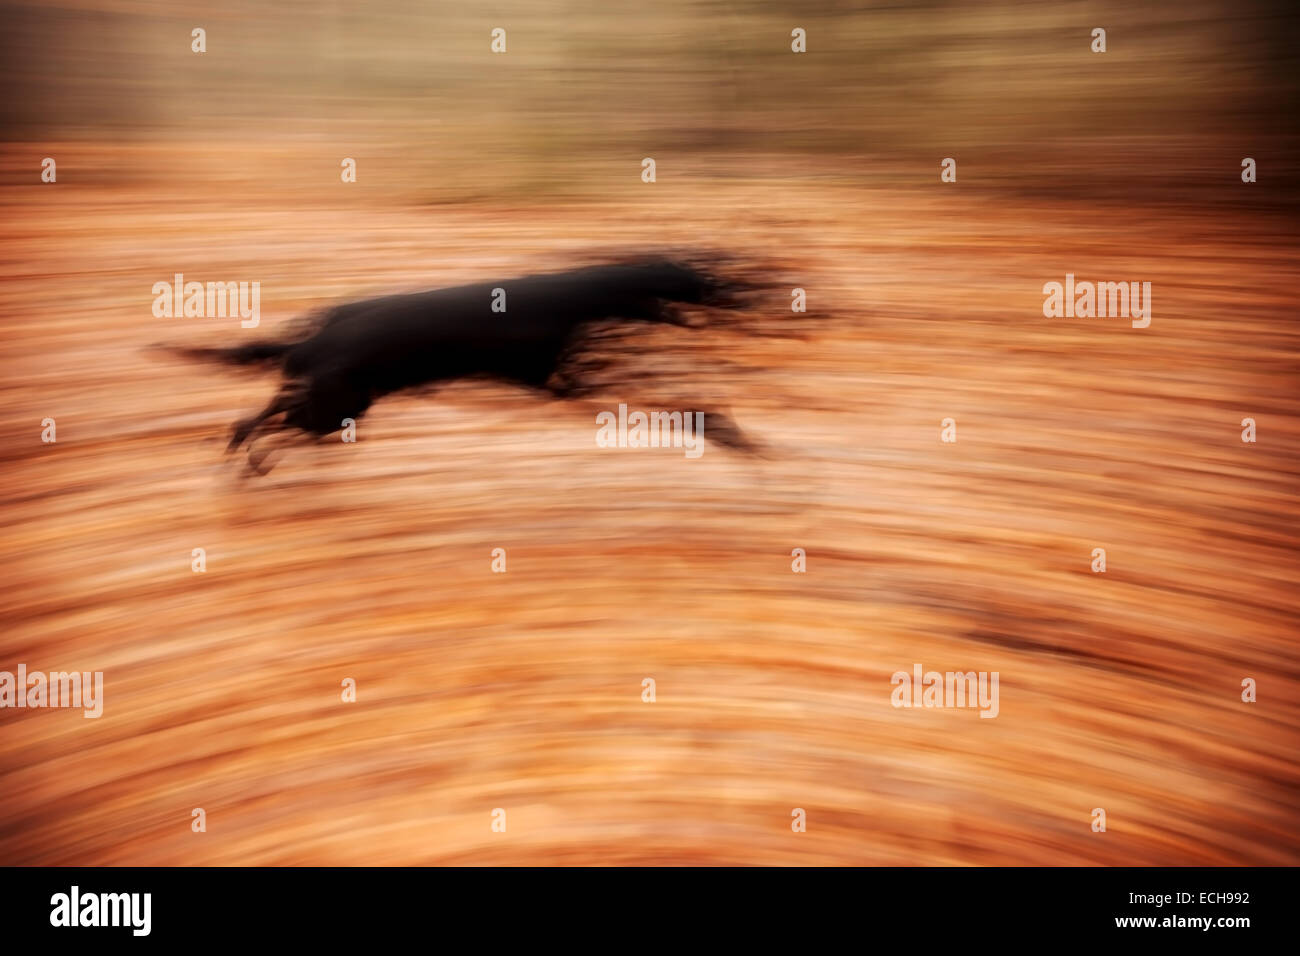 Abstract background. Motion blurred running dog in autumnal park. Stock Photo